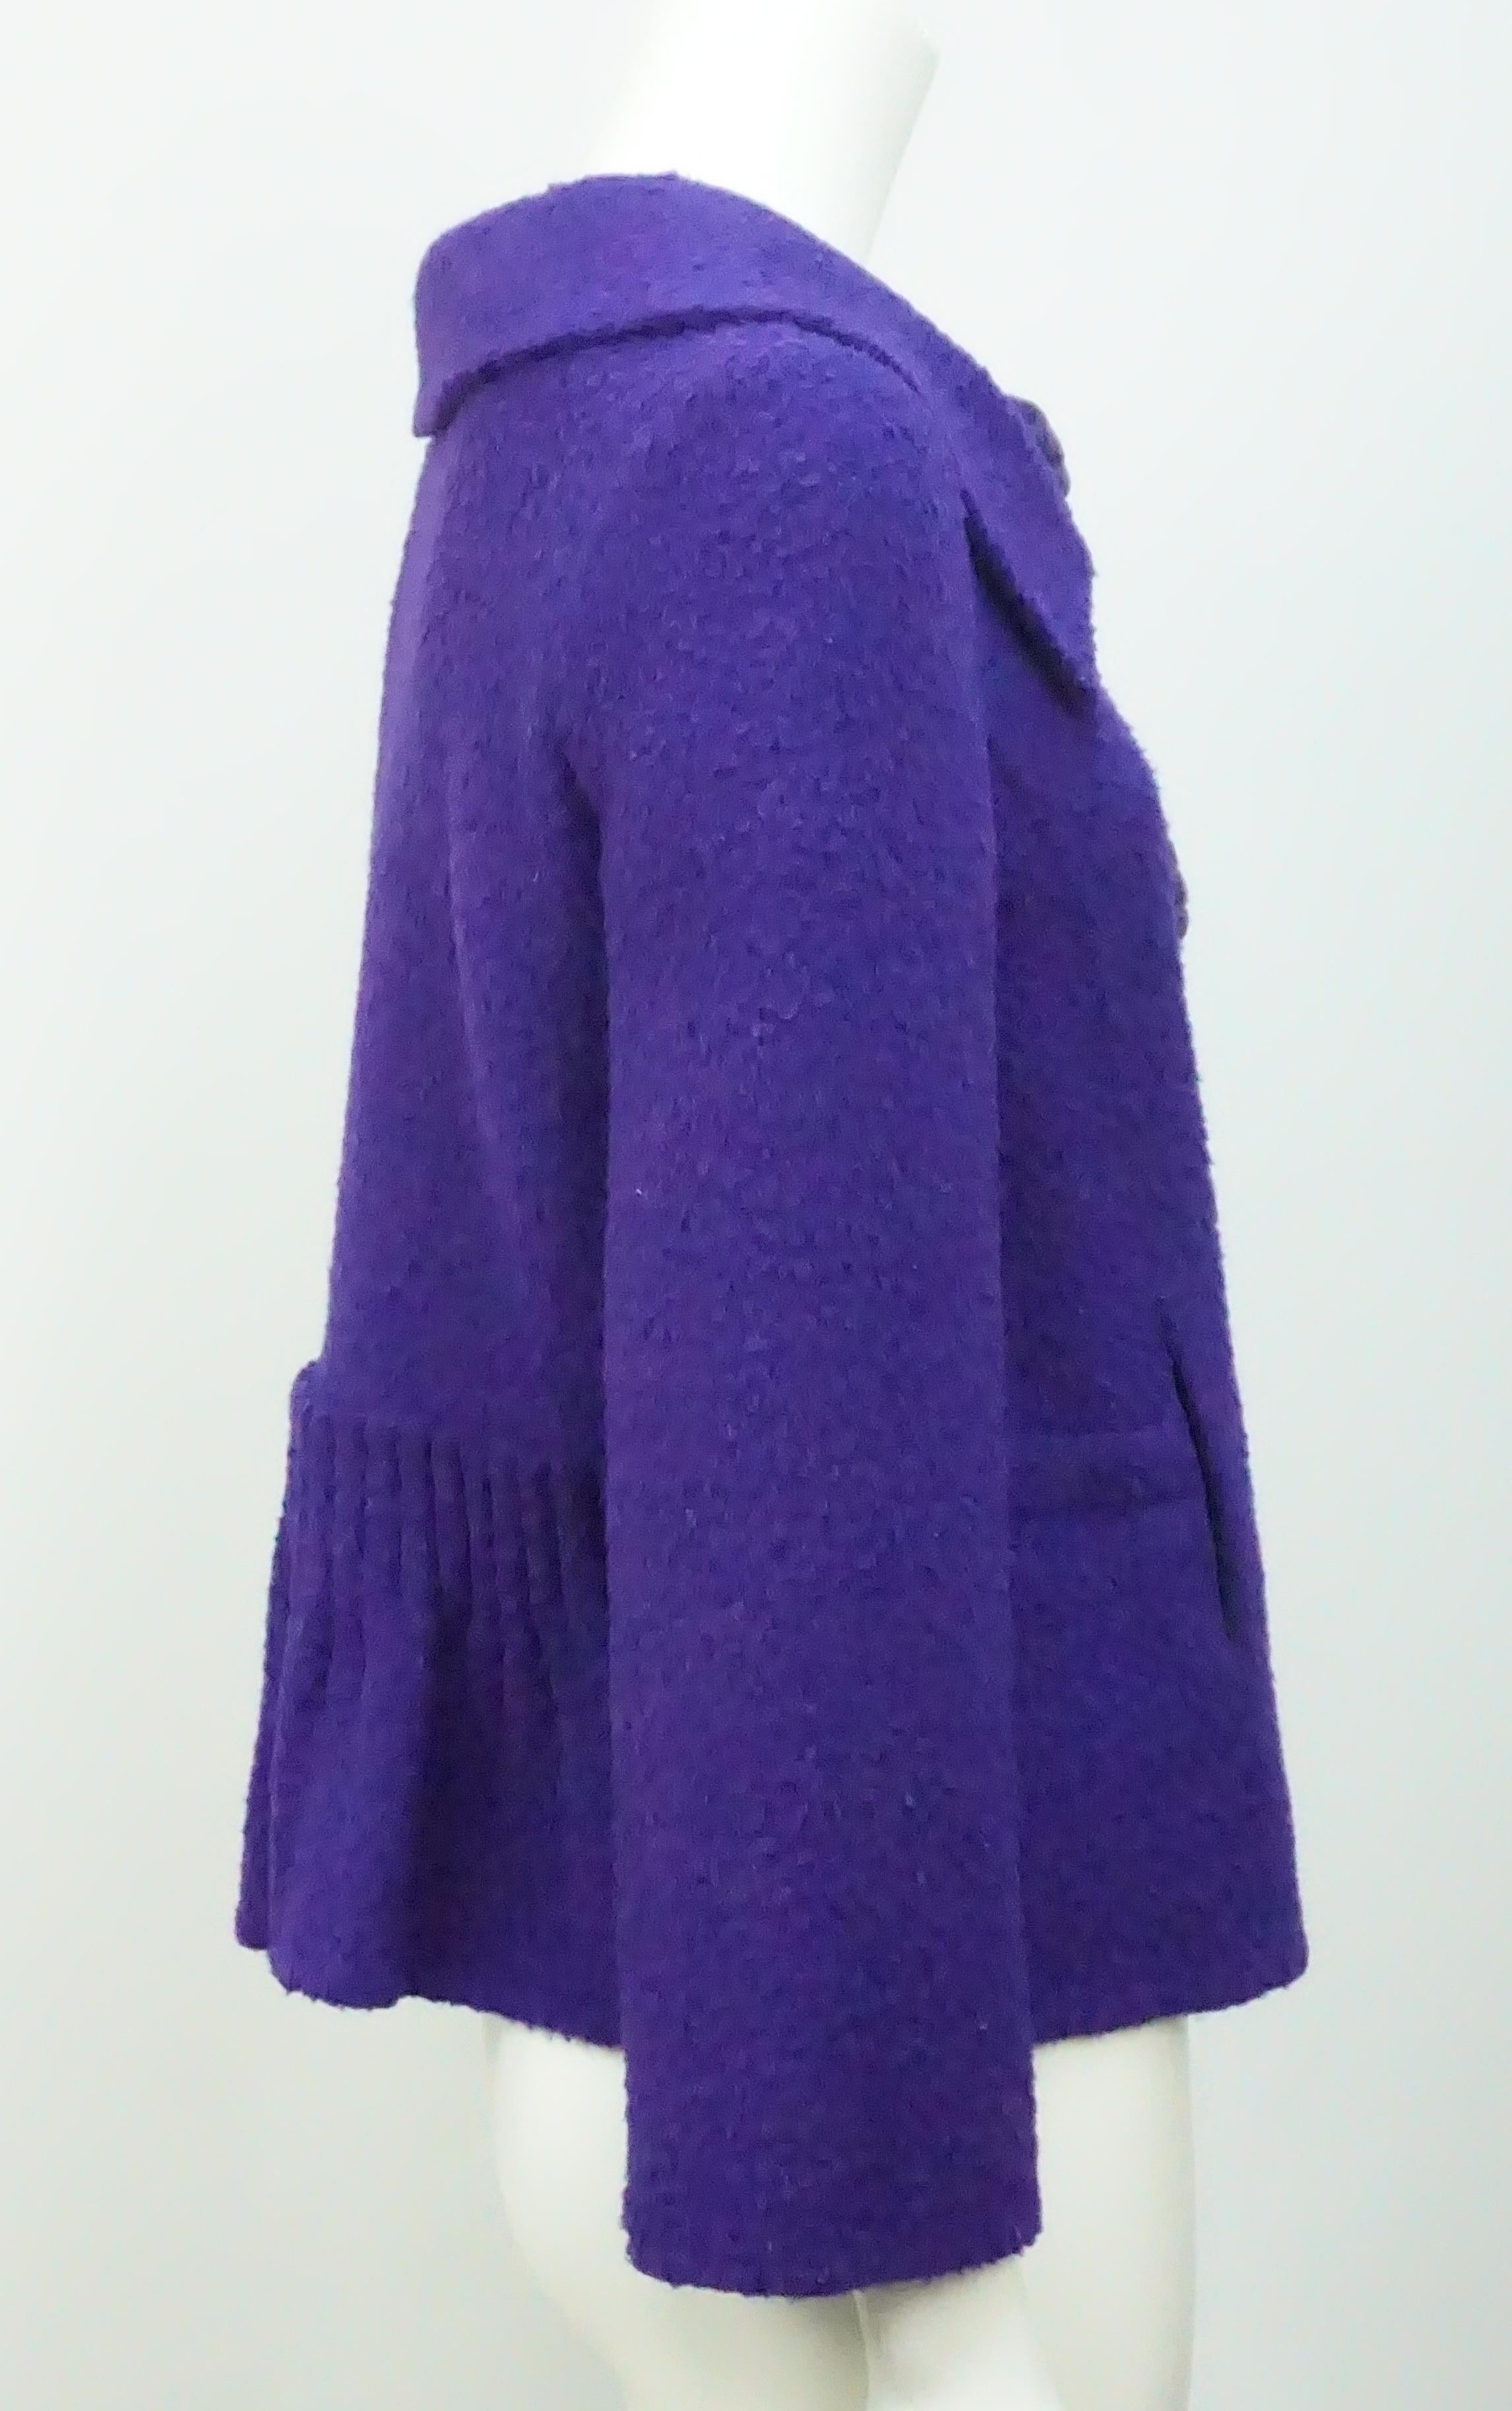 Oscar de la Renta Purple Alpaca Jacket with floral buttons-8. This beautiful jacket is a deep purple composed of wool and alpaca. It is in excellent condition. The jacket has three large buttons that have floral applique on them. It was released in